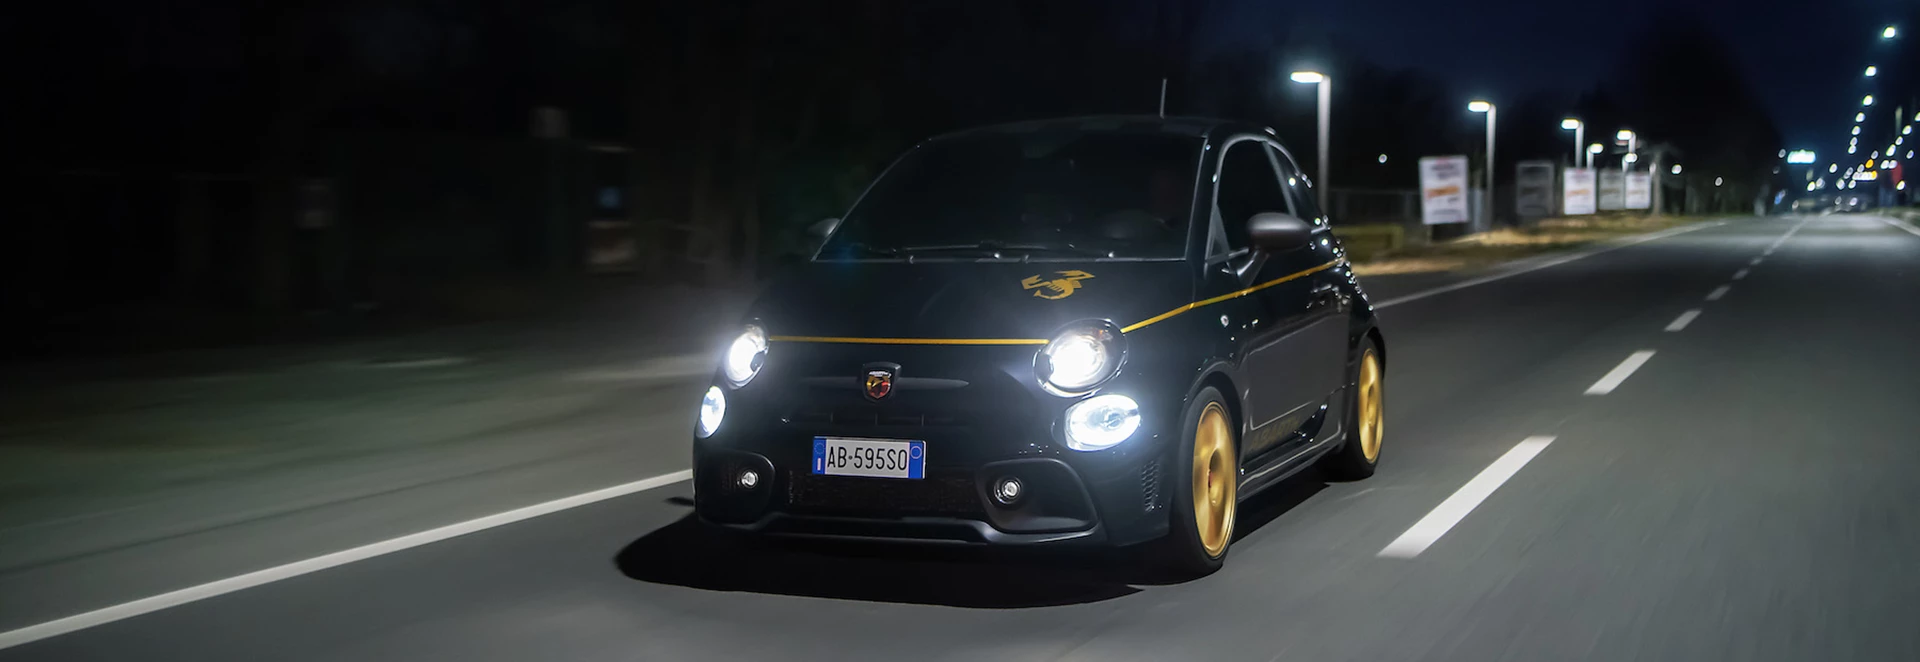 Abarth unveils two new limited edition versions of its 595 hot hatch 